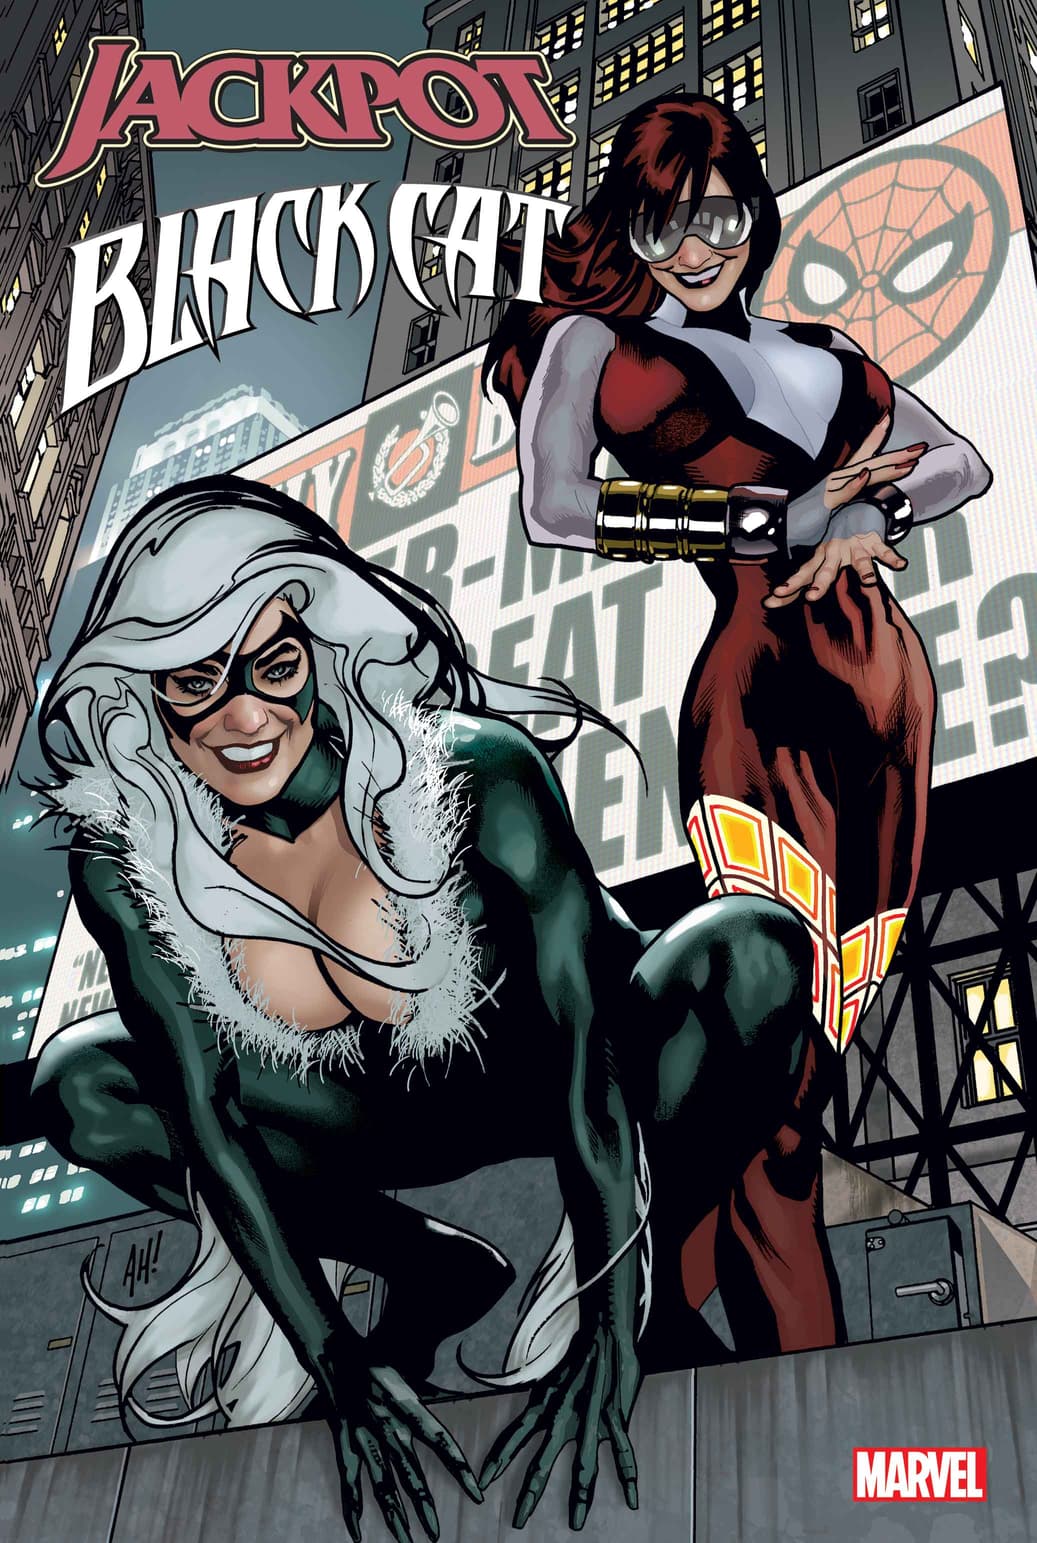 JACKPOT AND BLACK CAT #1 cover by Adam Hughes